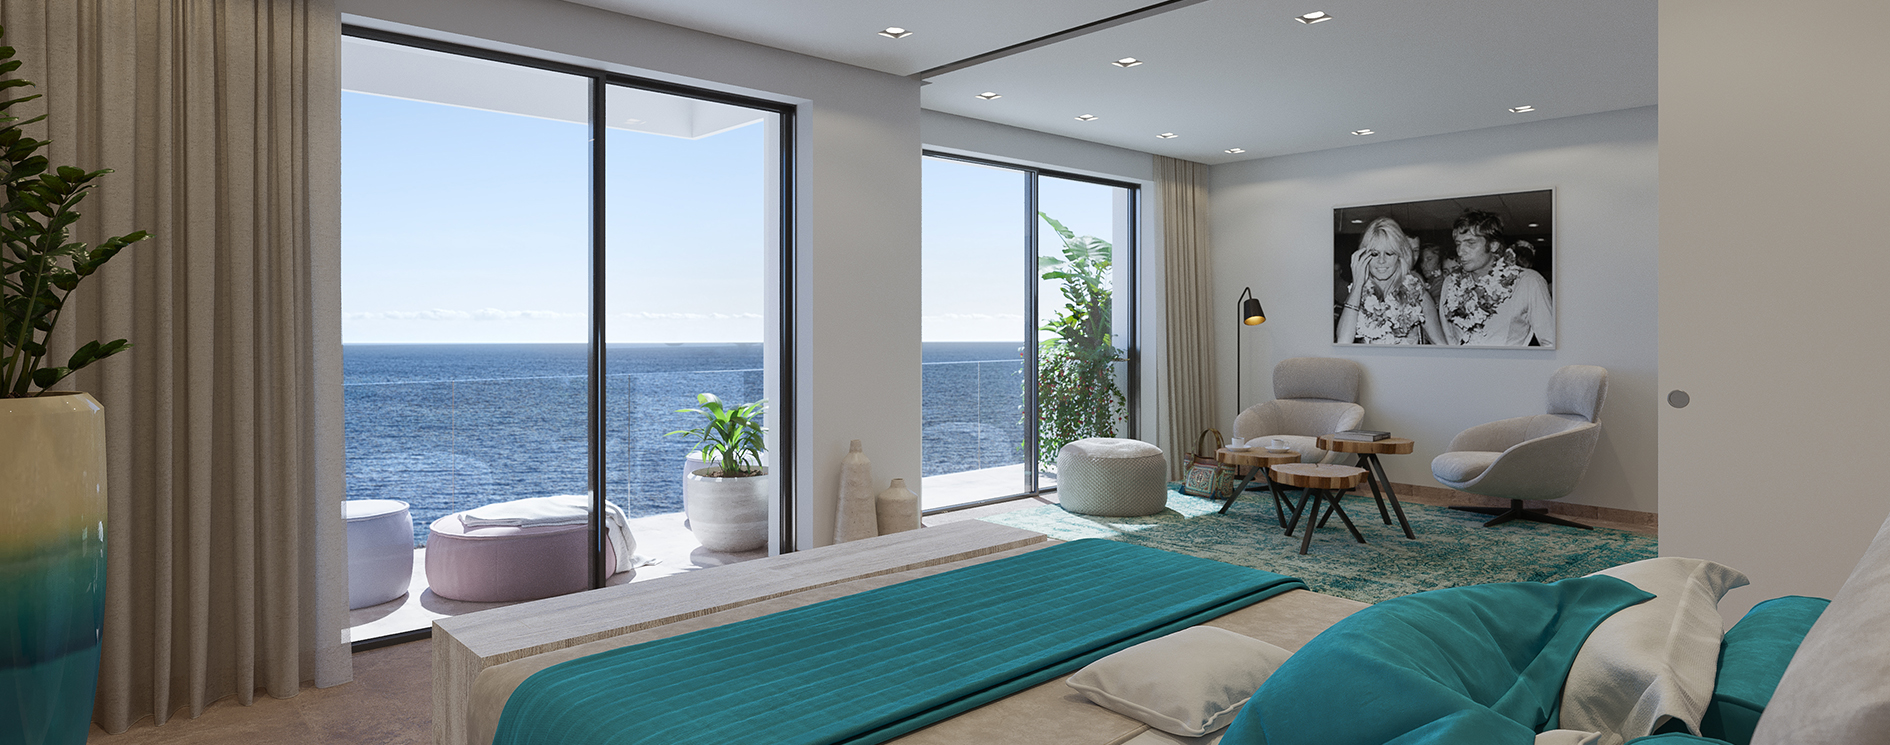 Construction of the shell completed – Construction work on the HIPPIEMENTS real estate project on Ibiza enters the final spurt